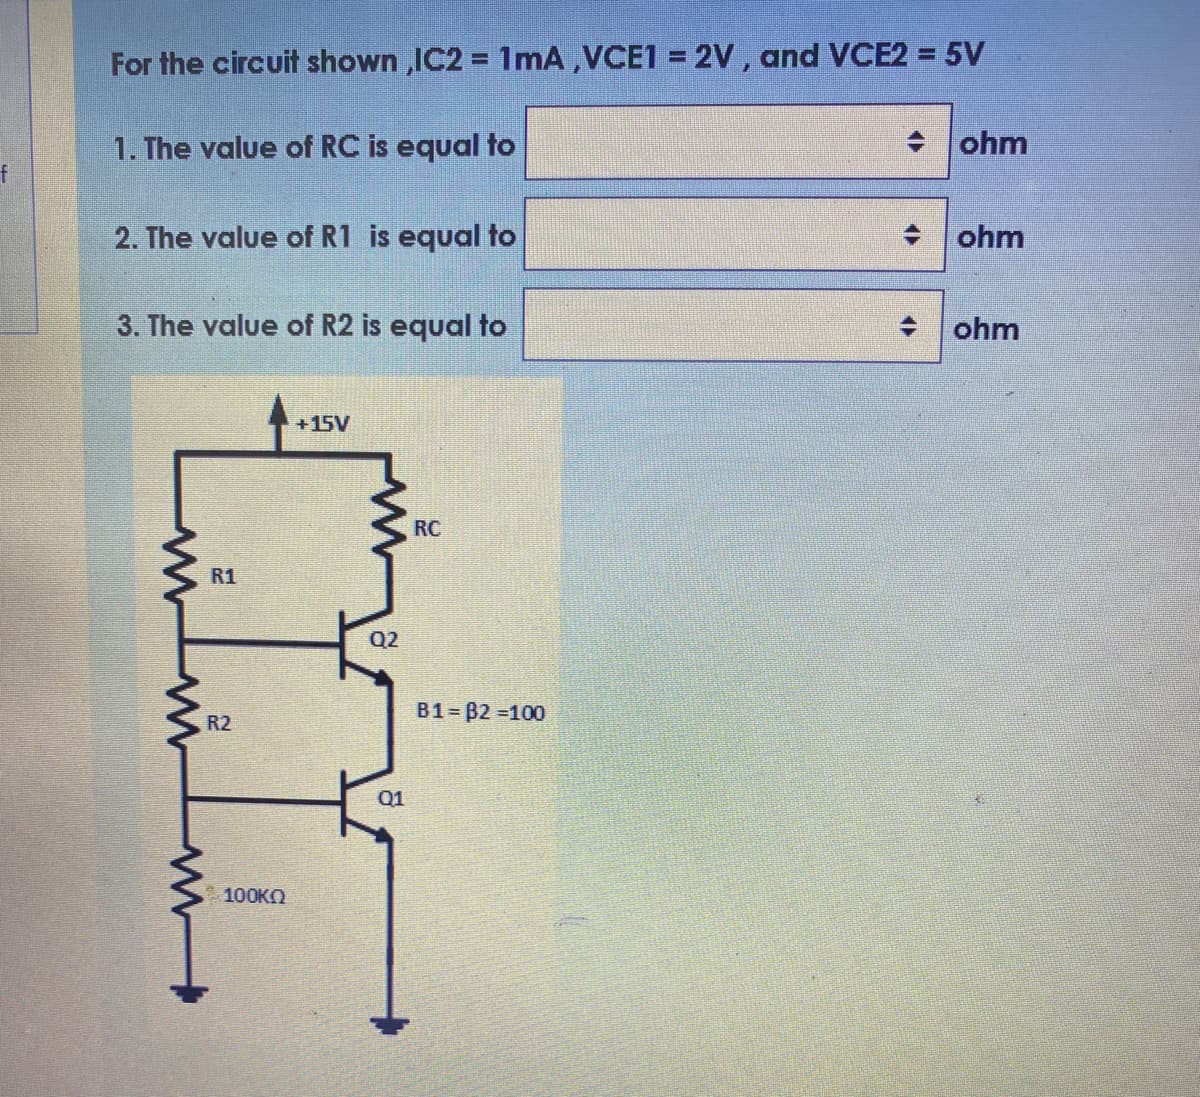 For the circuit shown ,IC2 = 1mA,VCE1 = 2V, and VCE2 = 5V
1. The value of RC is equal to
+ ohm
2. The value of R1 is equal to
+ ohm
3. The value of R2 is equal to
ohm
+15V
RC
R1
Q2
B1 B2 100
R2
Q1
100КO
